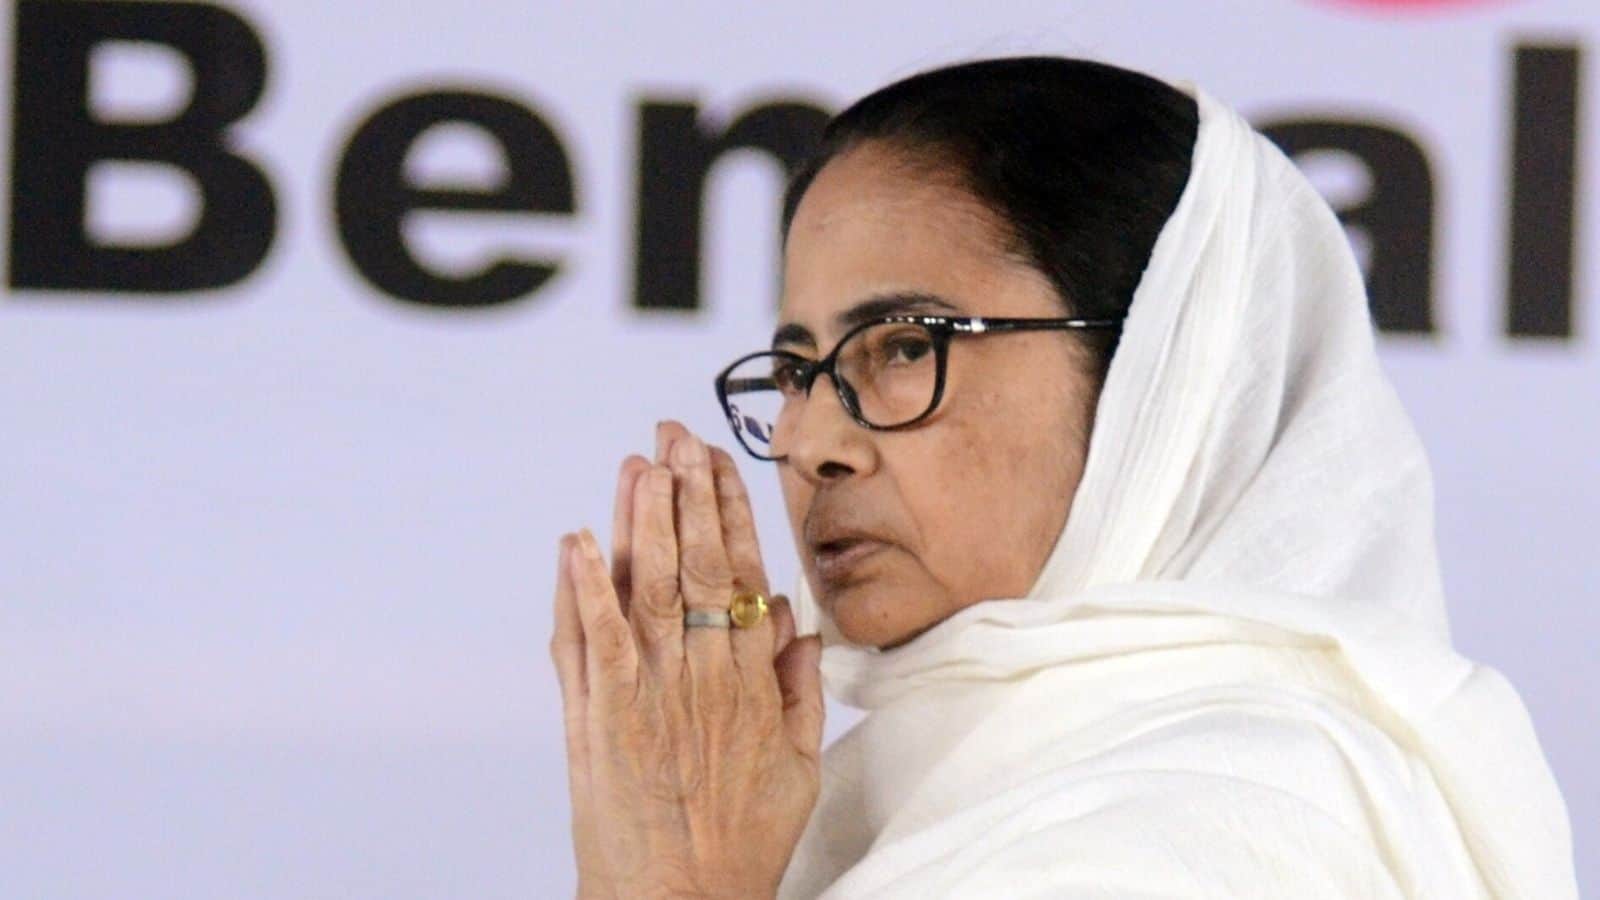 At Eid gathering, Mamata reiterates stance against CAA, NRC